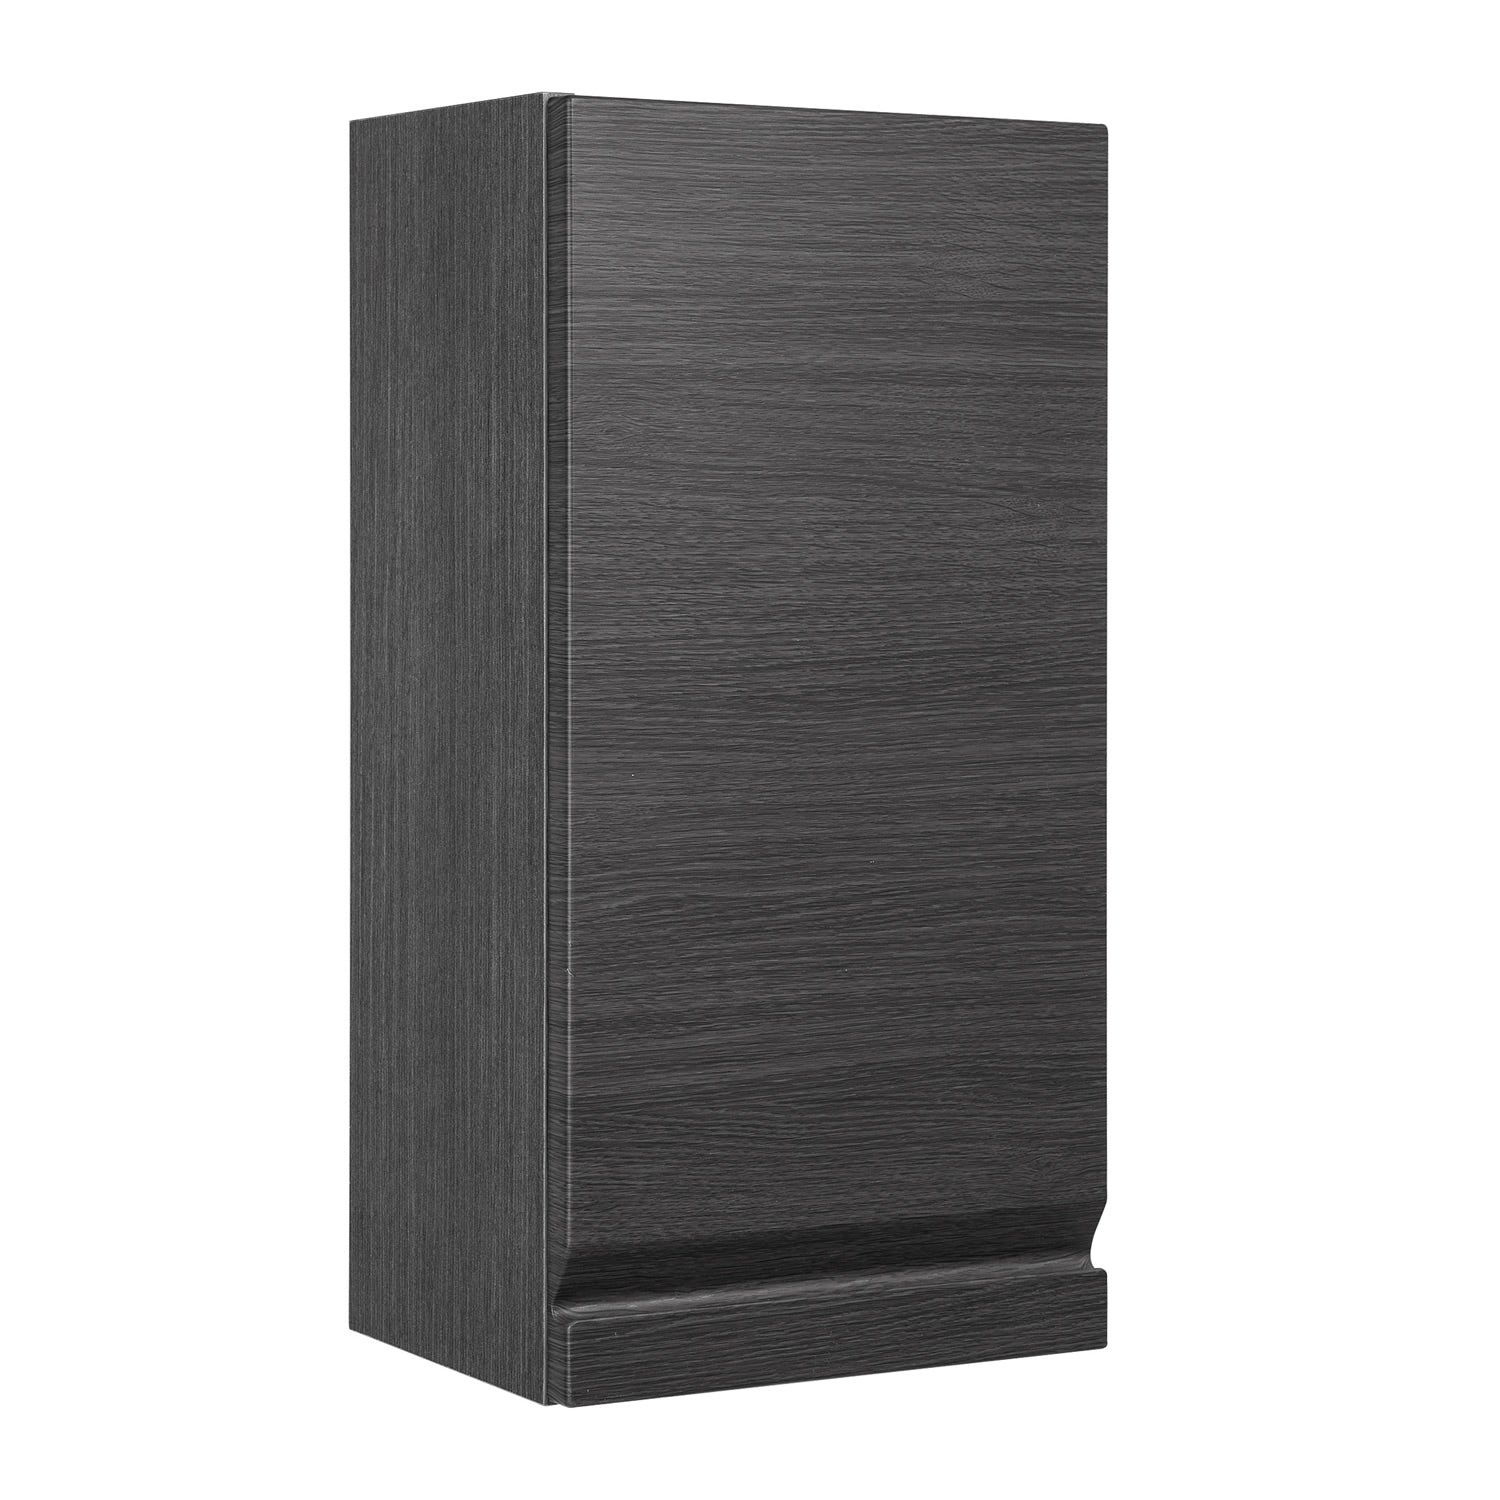 16" Small Side Cabinet, Wall Mount, 1 Door whit Soft Close and Right Opening, Grey, Serie Solco by VALENZUELA